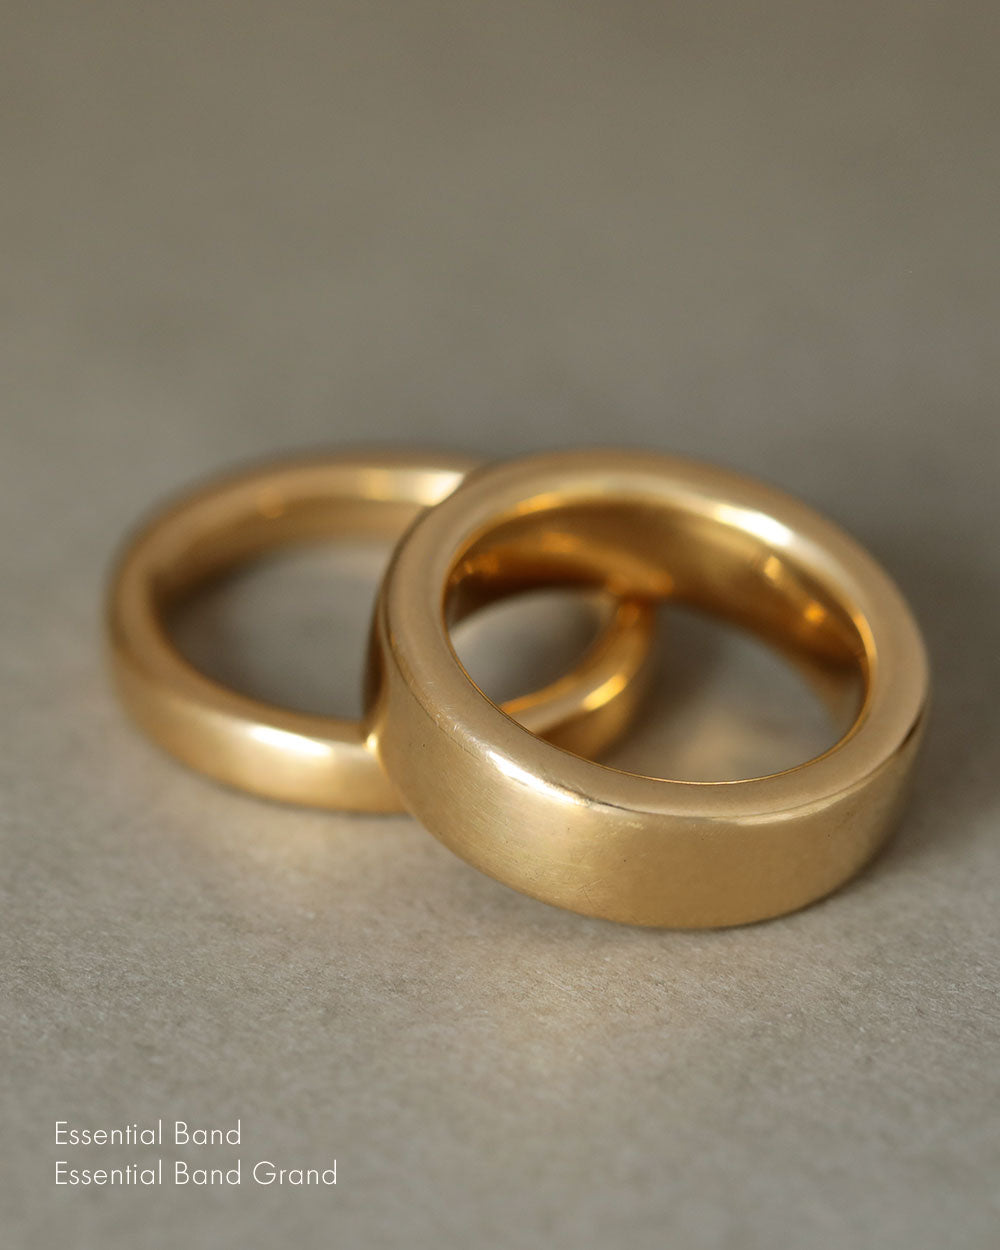 Heavy mens wedding band in solid 18k yellow gold, laying on gray paper. Essential Grand Band by George Rings.